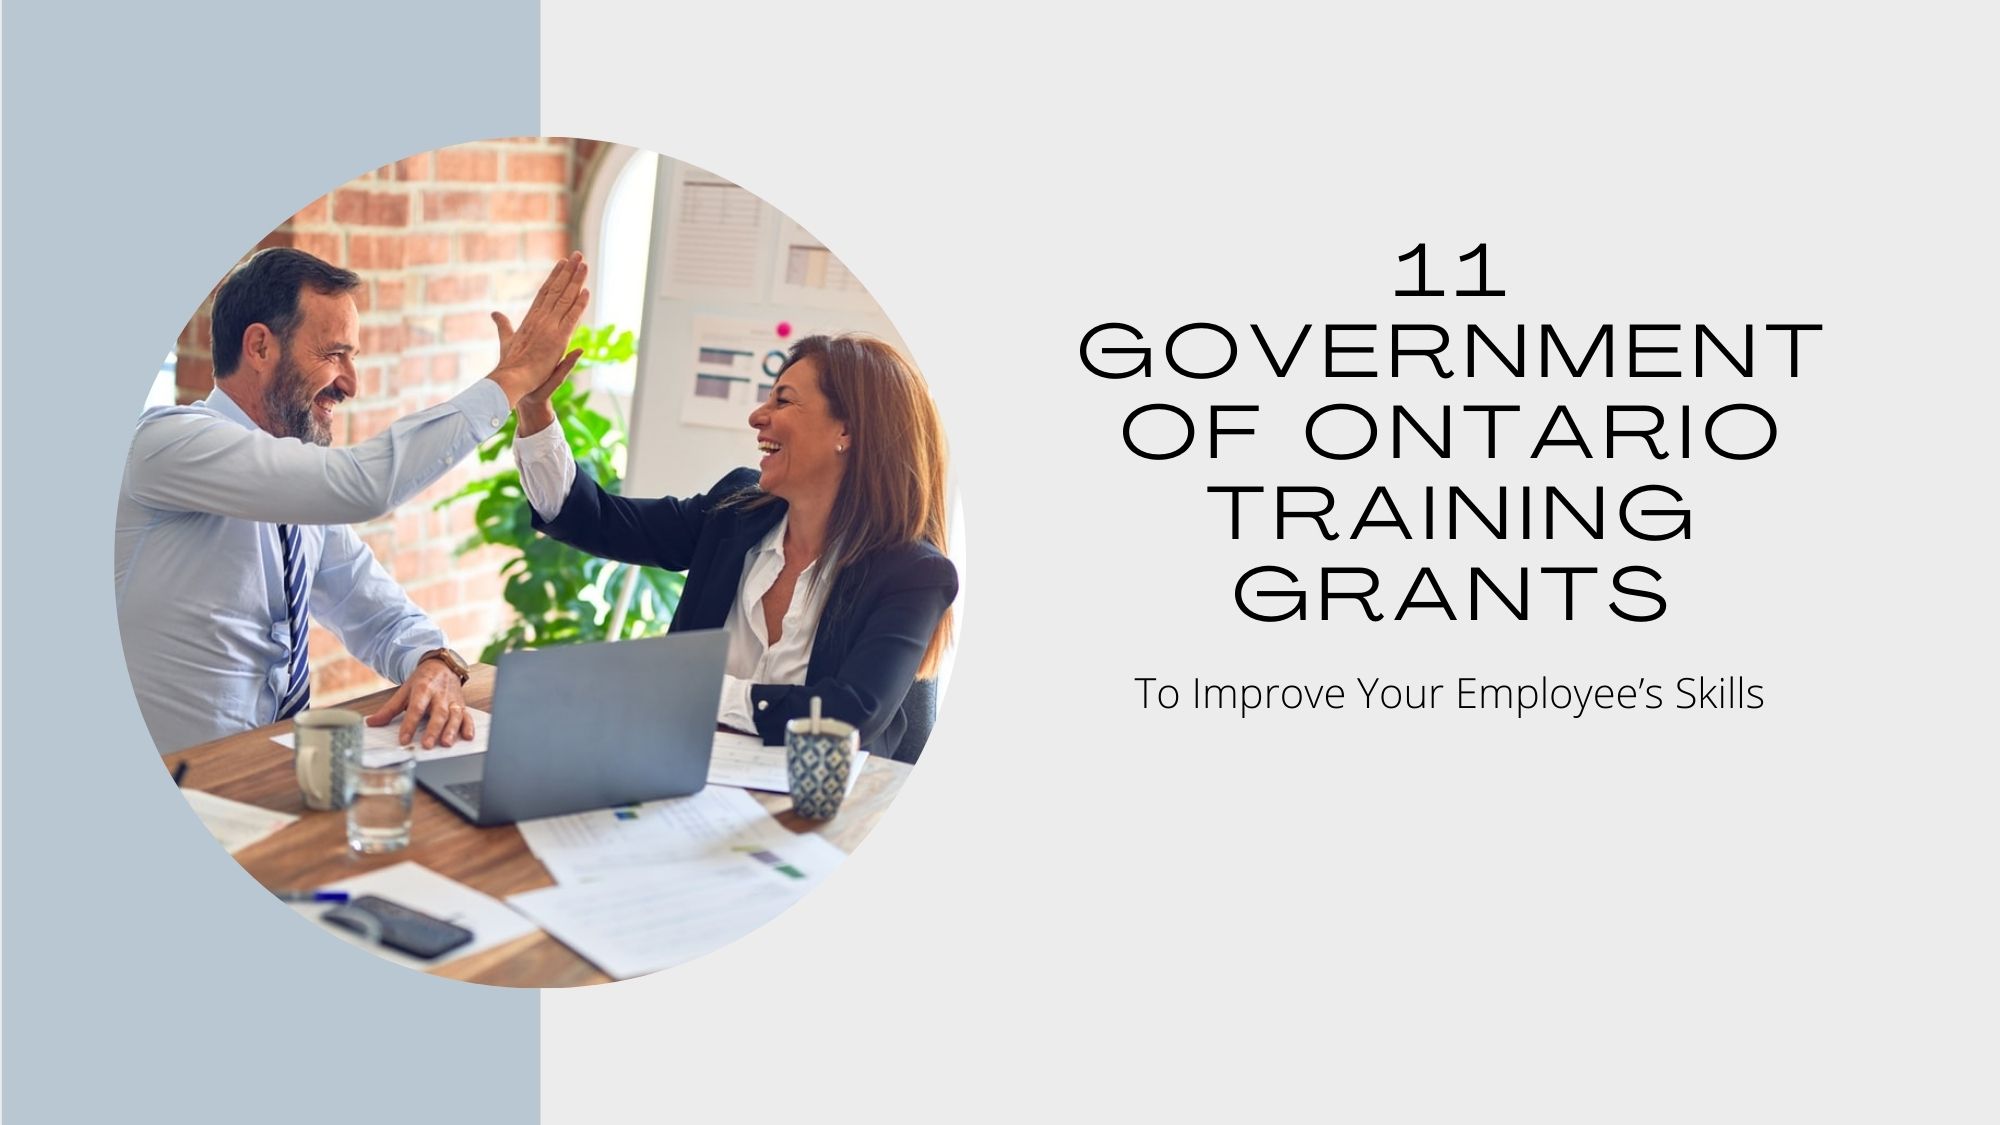 11 Government of Ontario Training Grants to Improve Your Employee’s Skills